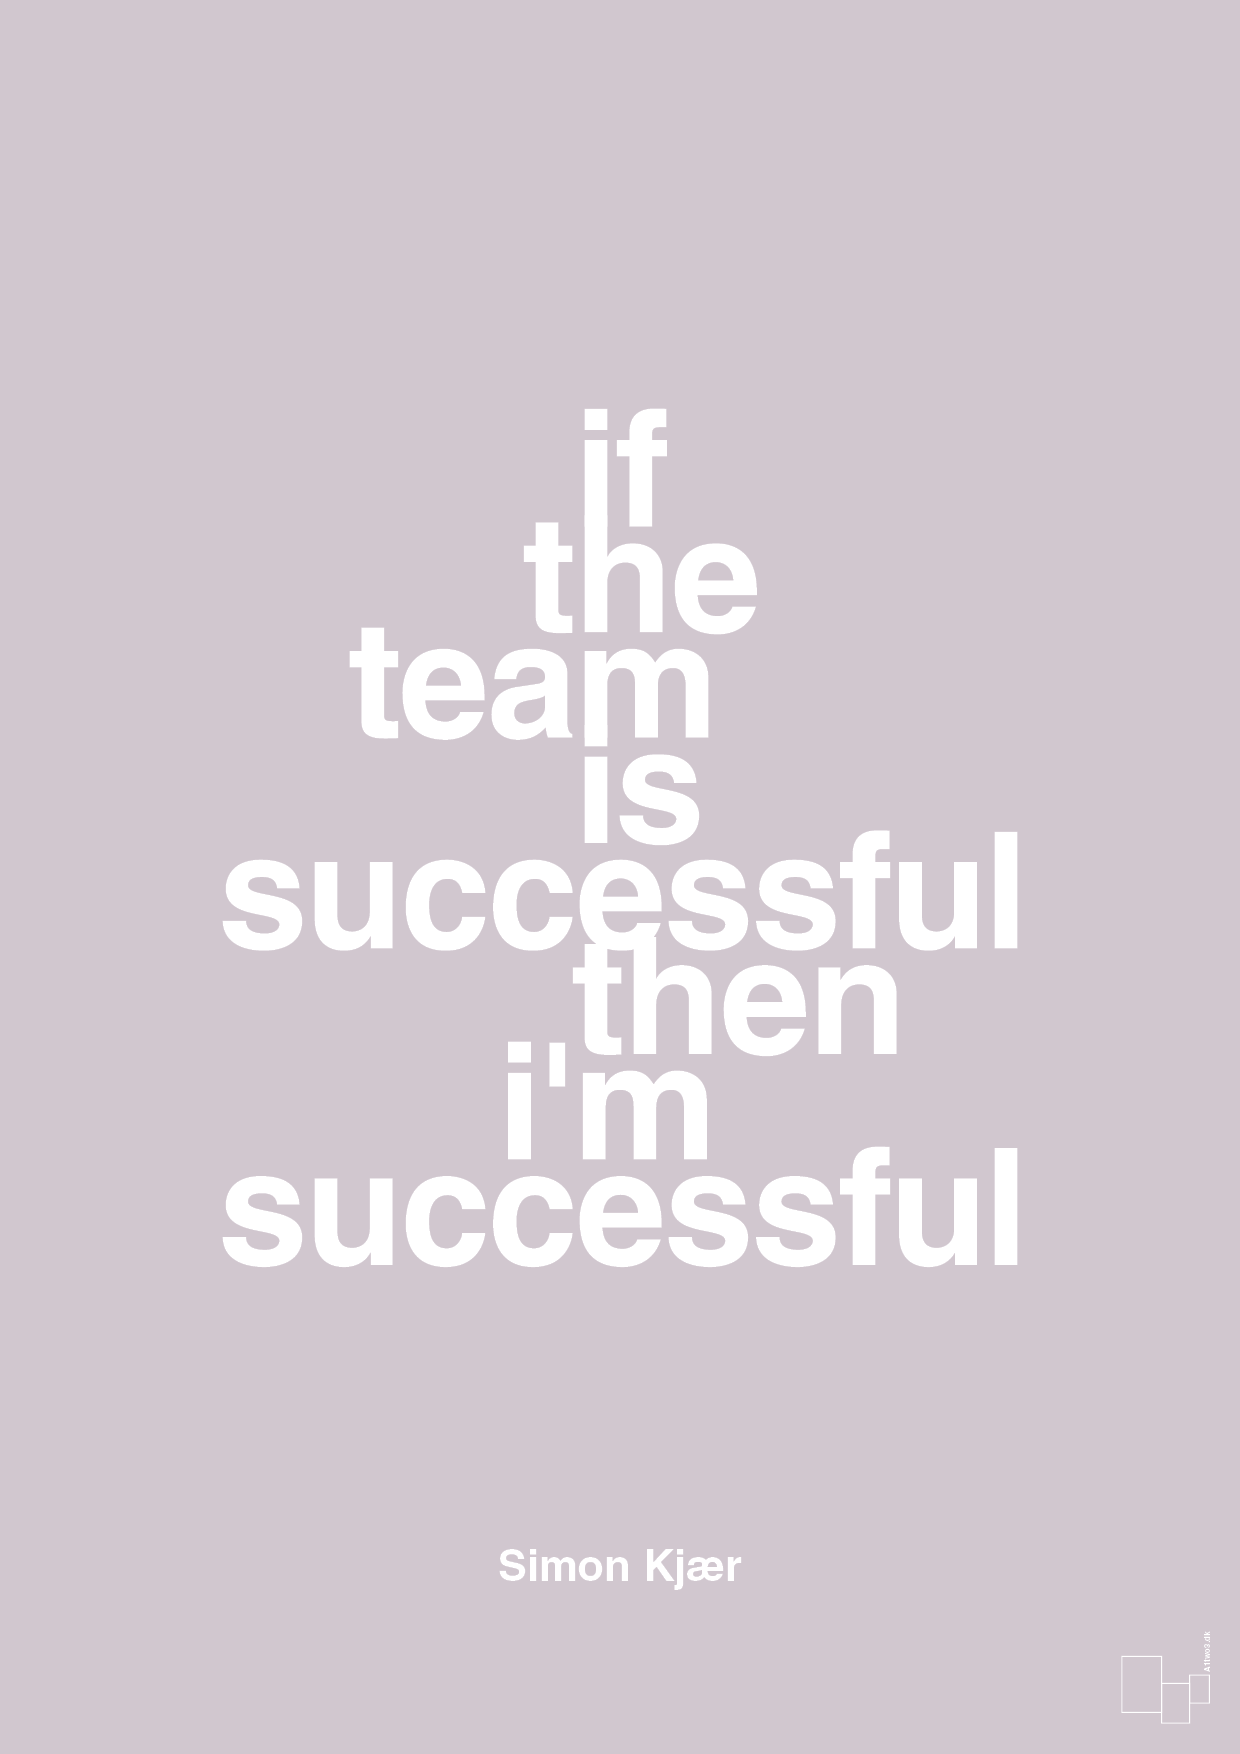 if the team is successful then i'm successful - Plakat med Citater i Dusty Lilac